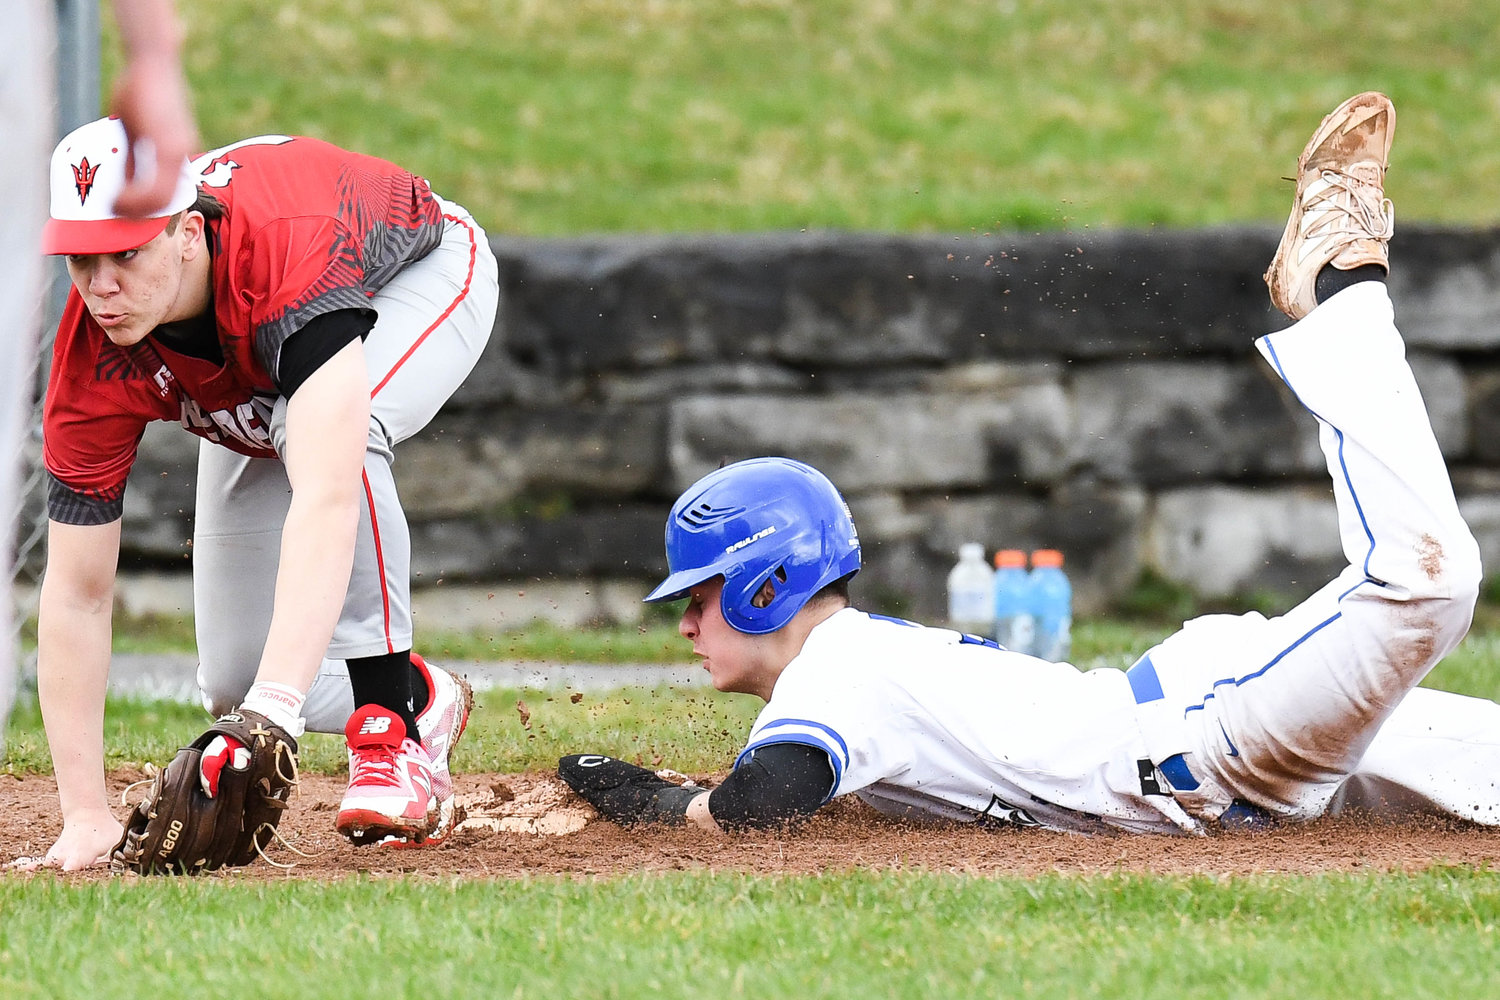 SAFE AT THIRD — Whitesboro player Colin Skermont slides safely into third base as Vernon-Verona-Sherrill’s Connor Tiffin has trouble with a wild throw during a non-league baseball game on Wednesday in Whitesboro. The Warriors won 9-2.